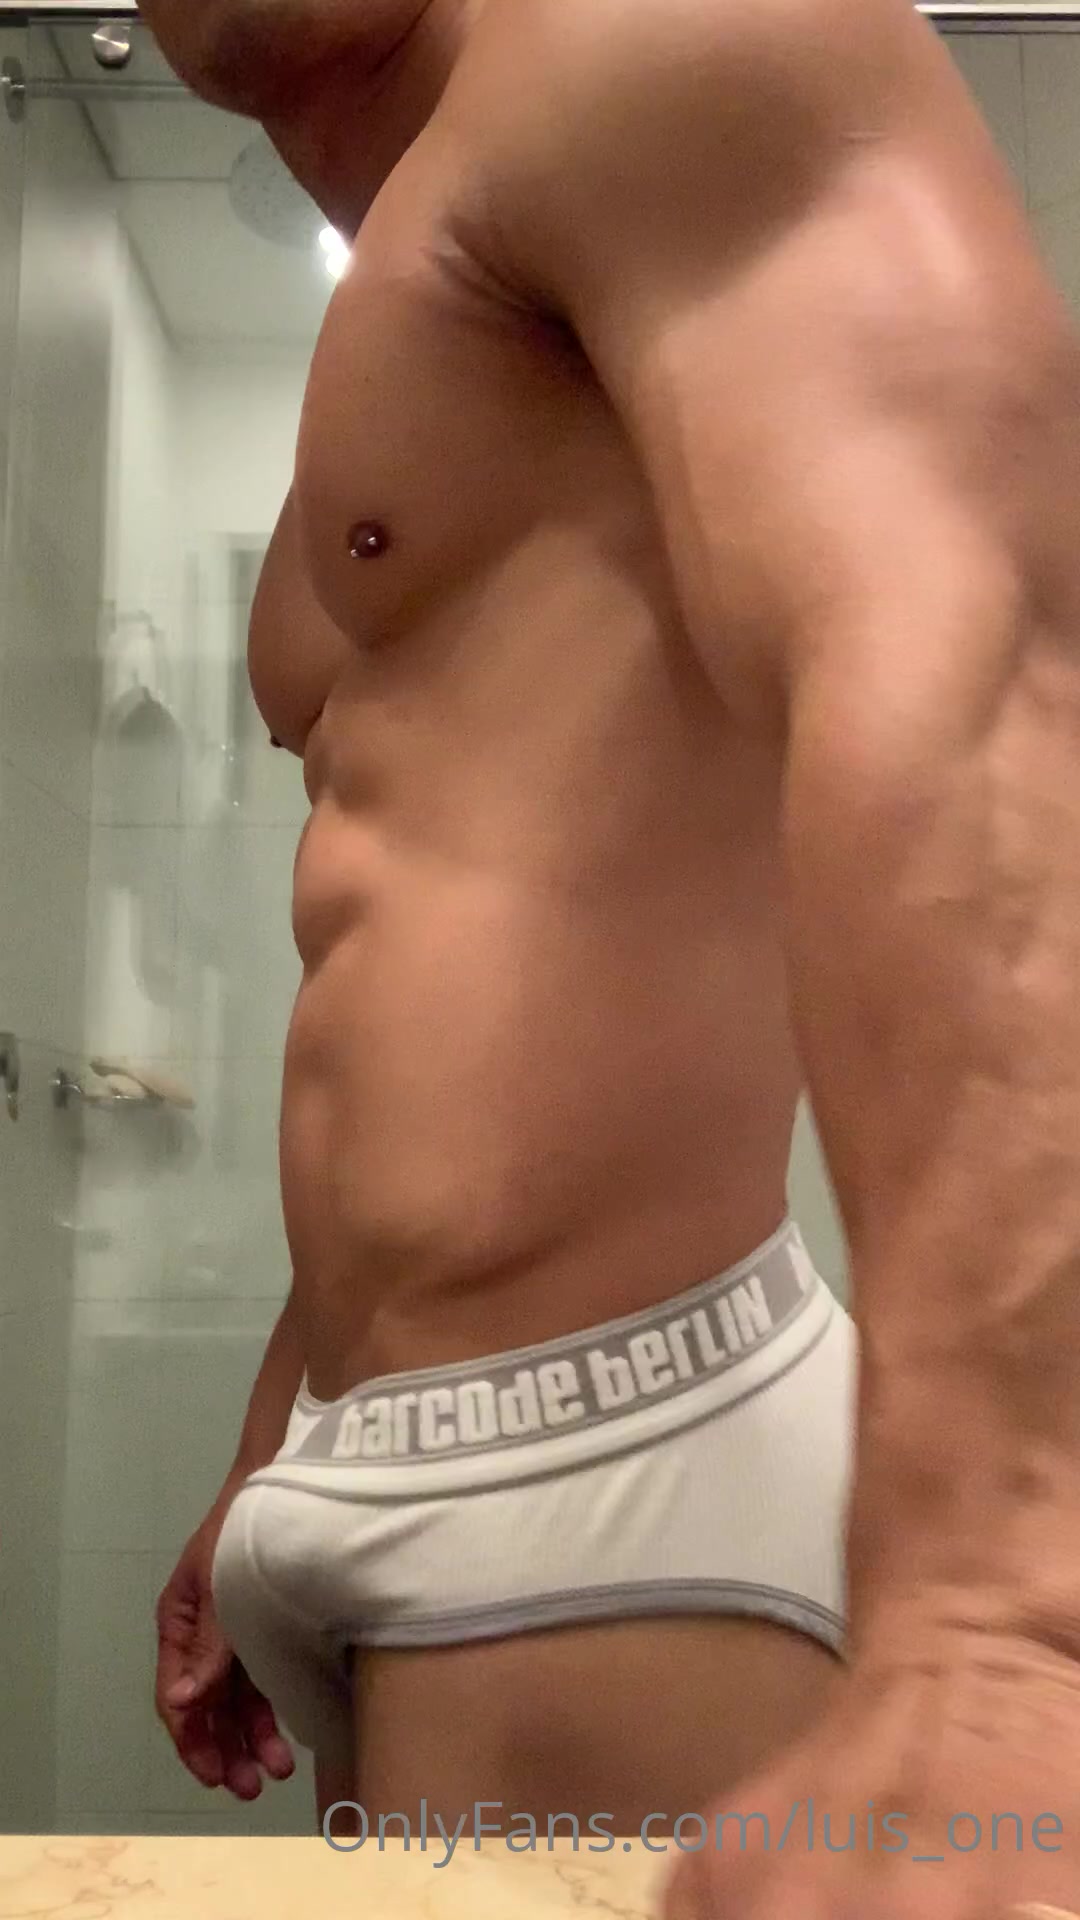 Only Fans Videos, All Free Gay Porn, YourPornGod, tom. 